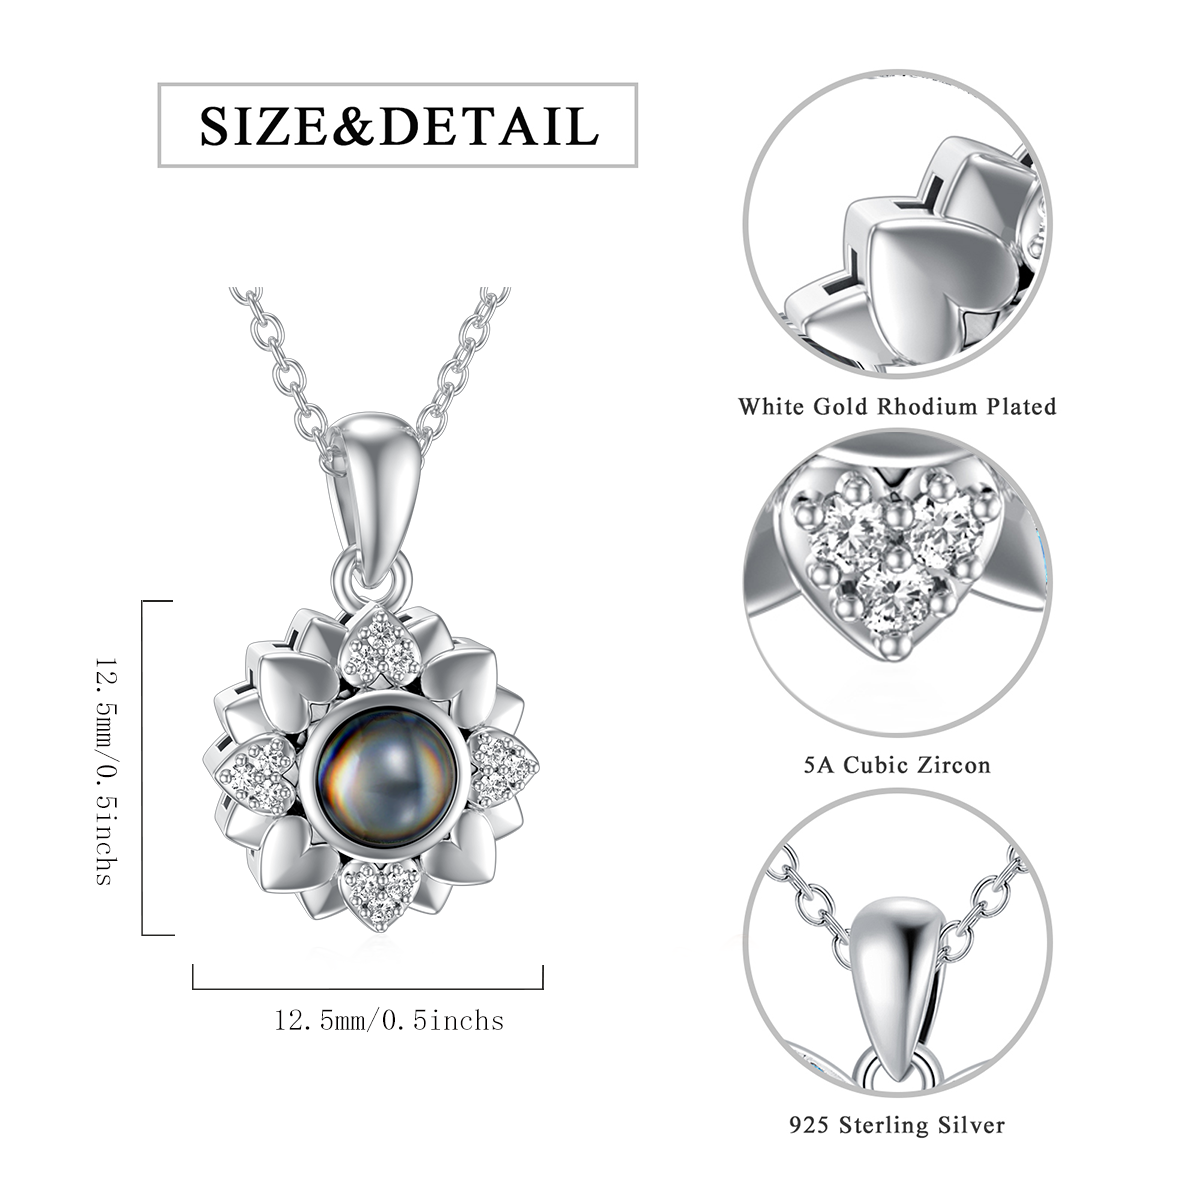 Sterling Silver Projection Stone & Personalized Projection Sunflower & Personalized Photo Pendant Necklace-4